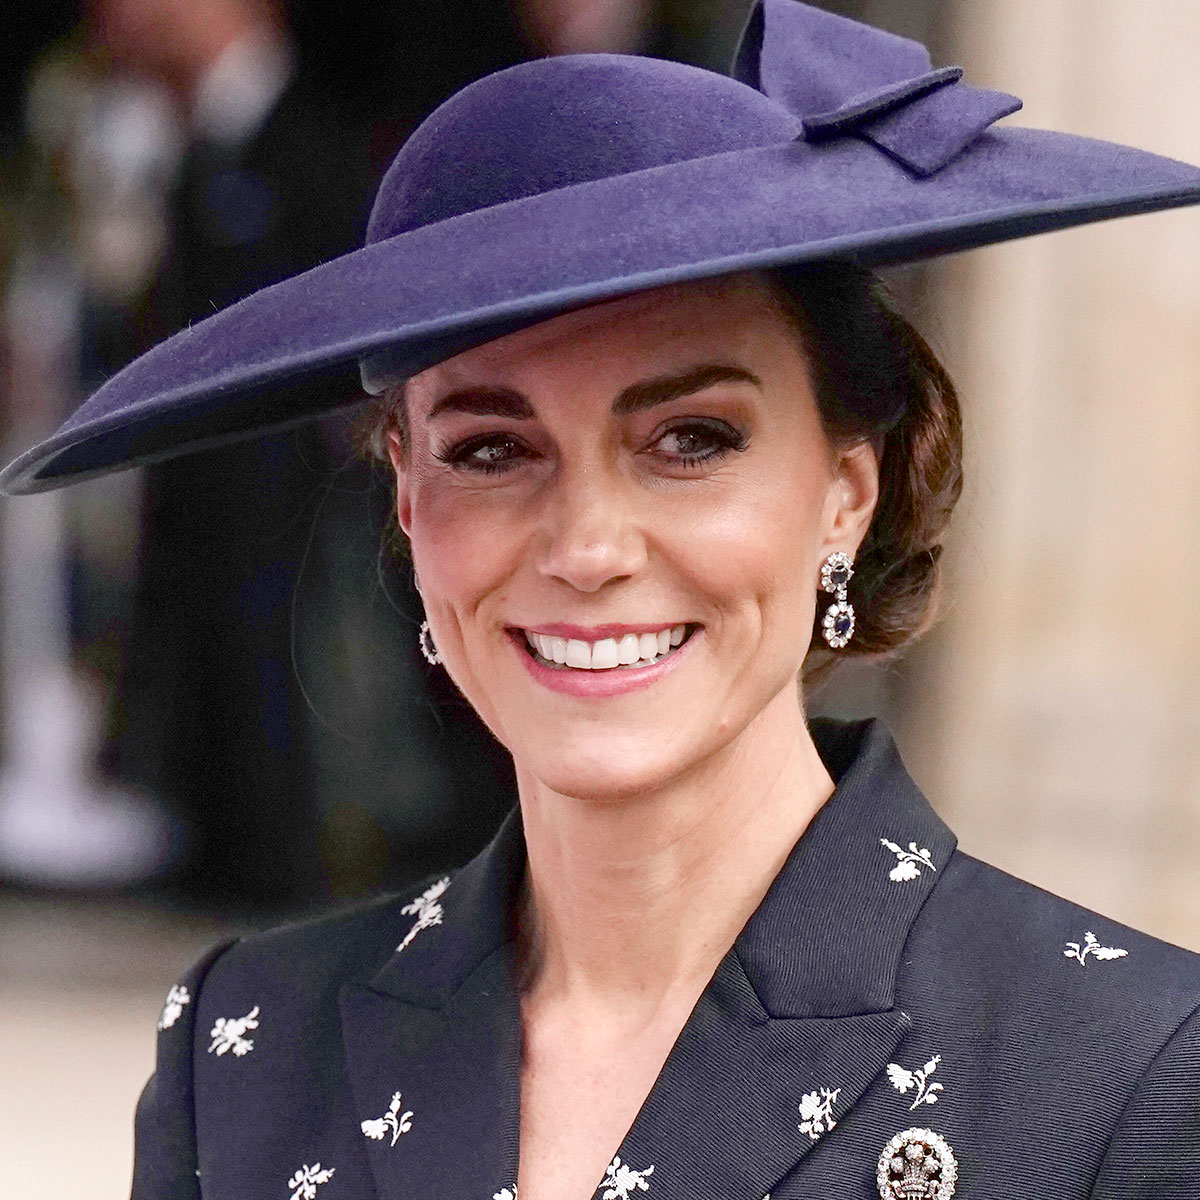 Kate Middleton's Floral Suit With A Flared Skirt And Peplum Blazer Has The Divided SHEfinds